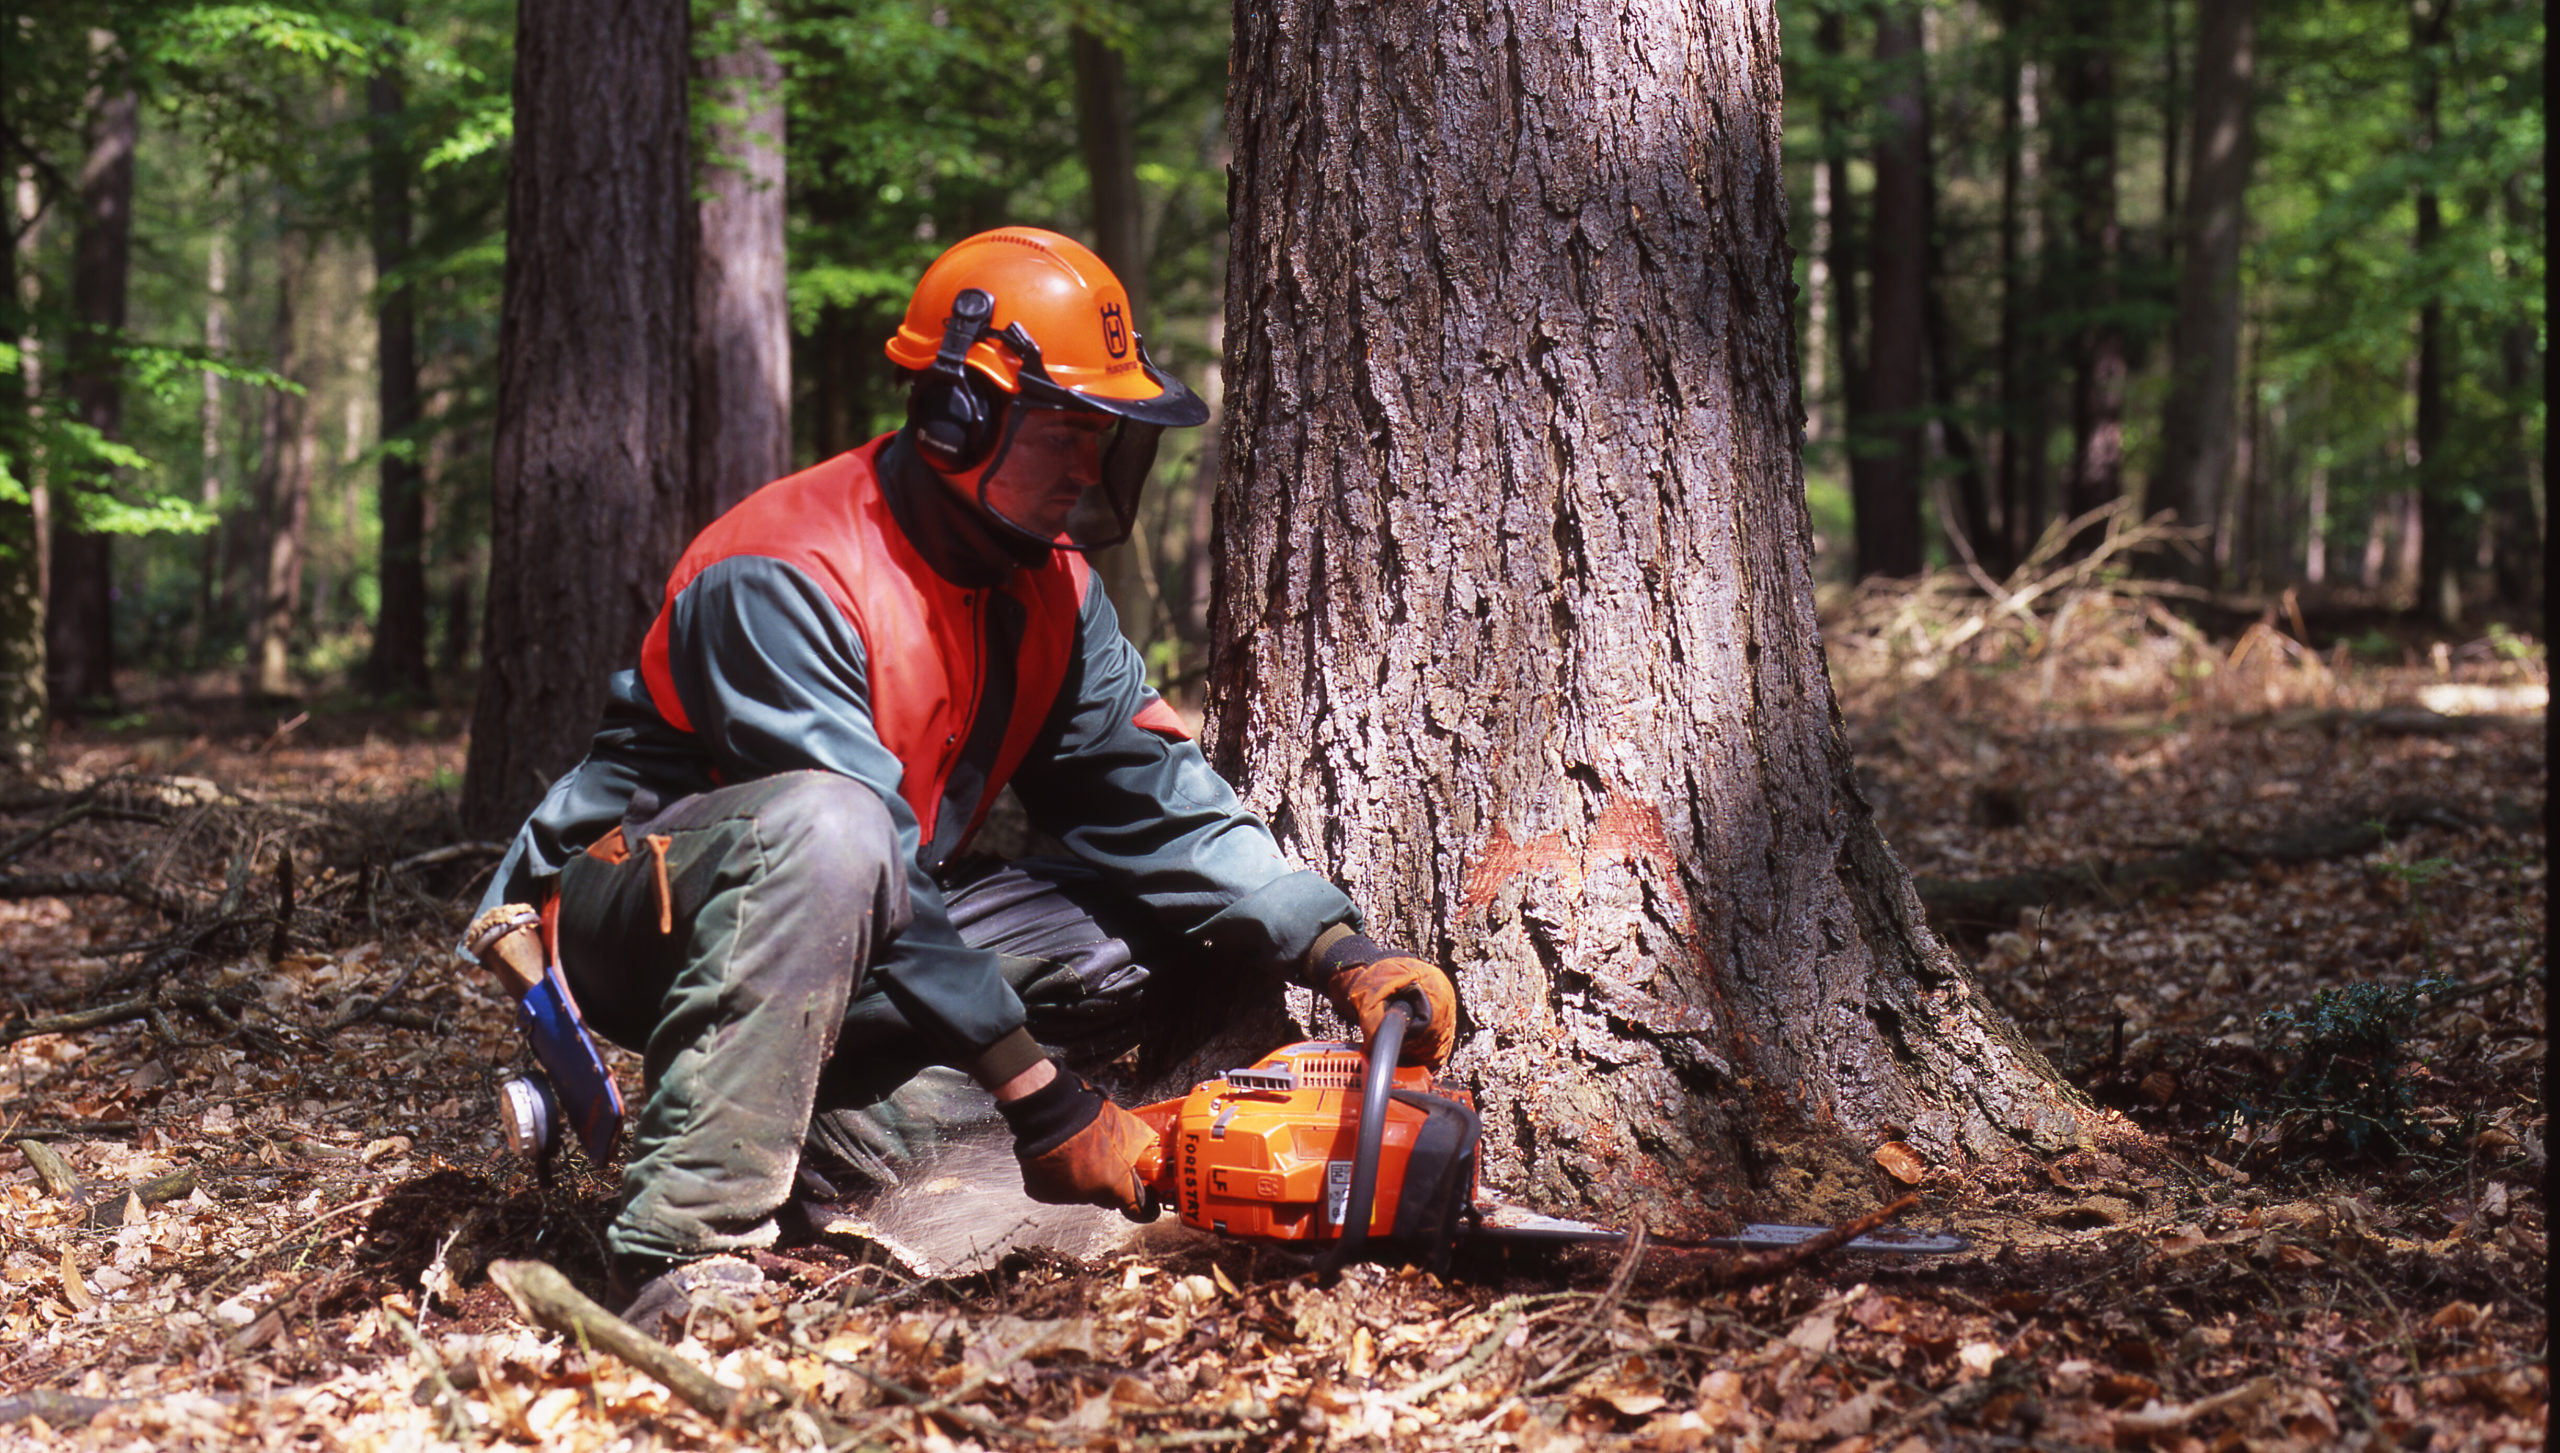 A forester wearing protective gear begins thinning out a section of the forest.